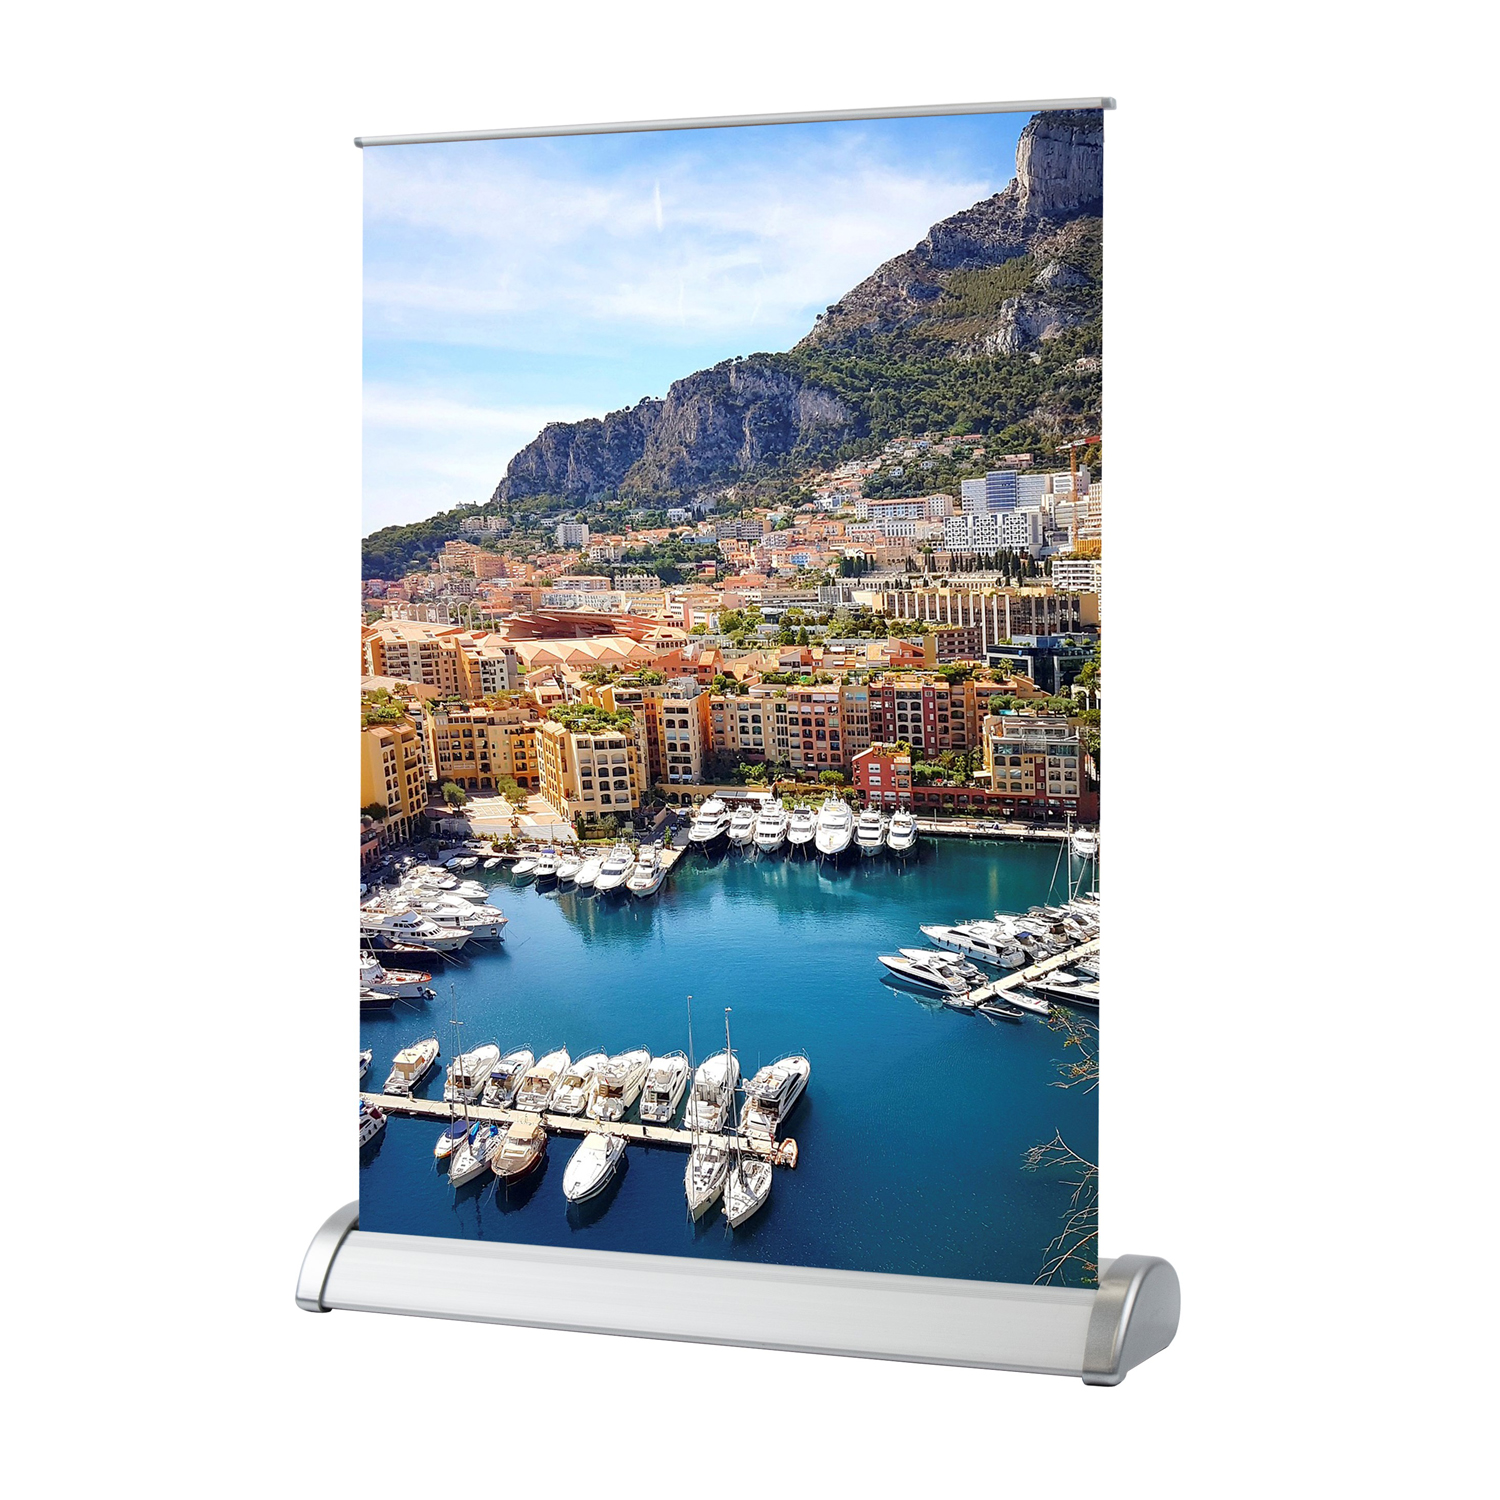 Desktop Pull Up Banners The Big Display Company